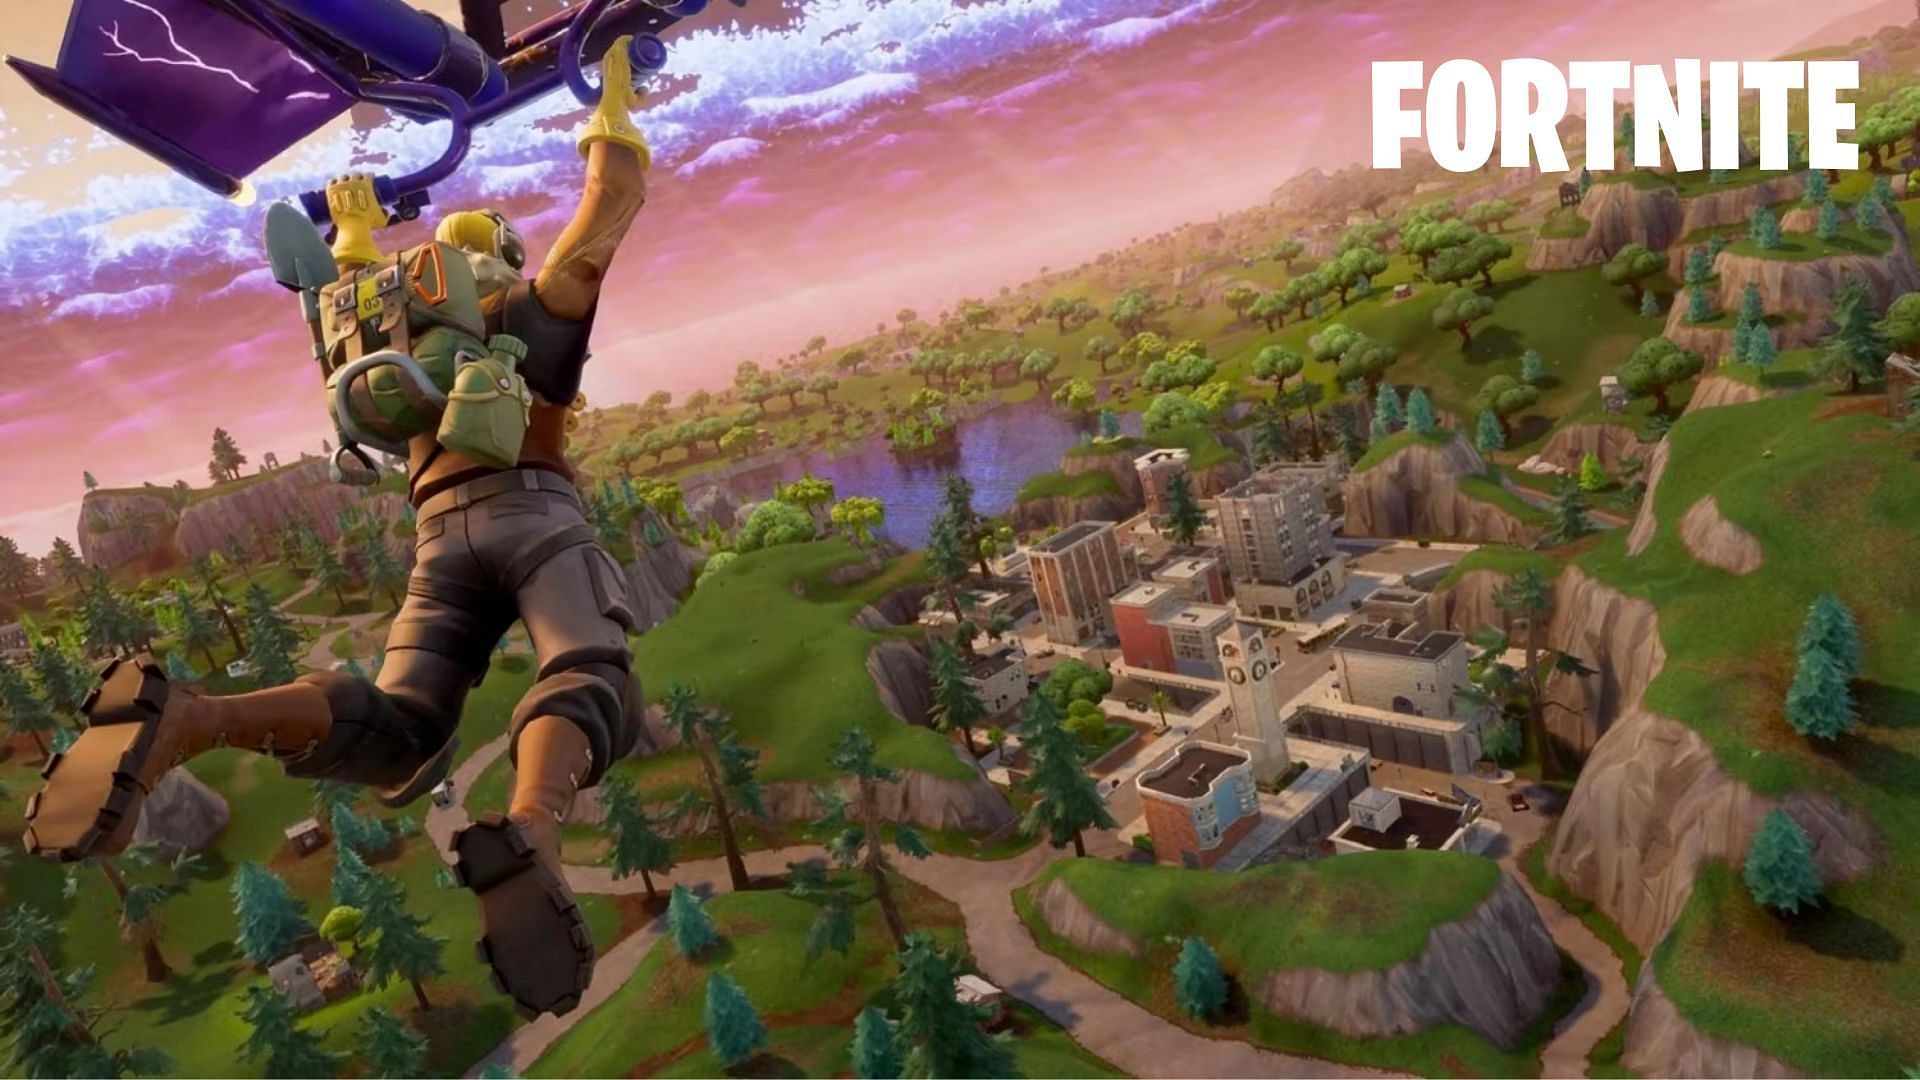 Fortnite OG Players have witnessed unique things in-game (Image via Epic Games)